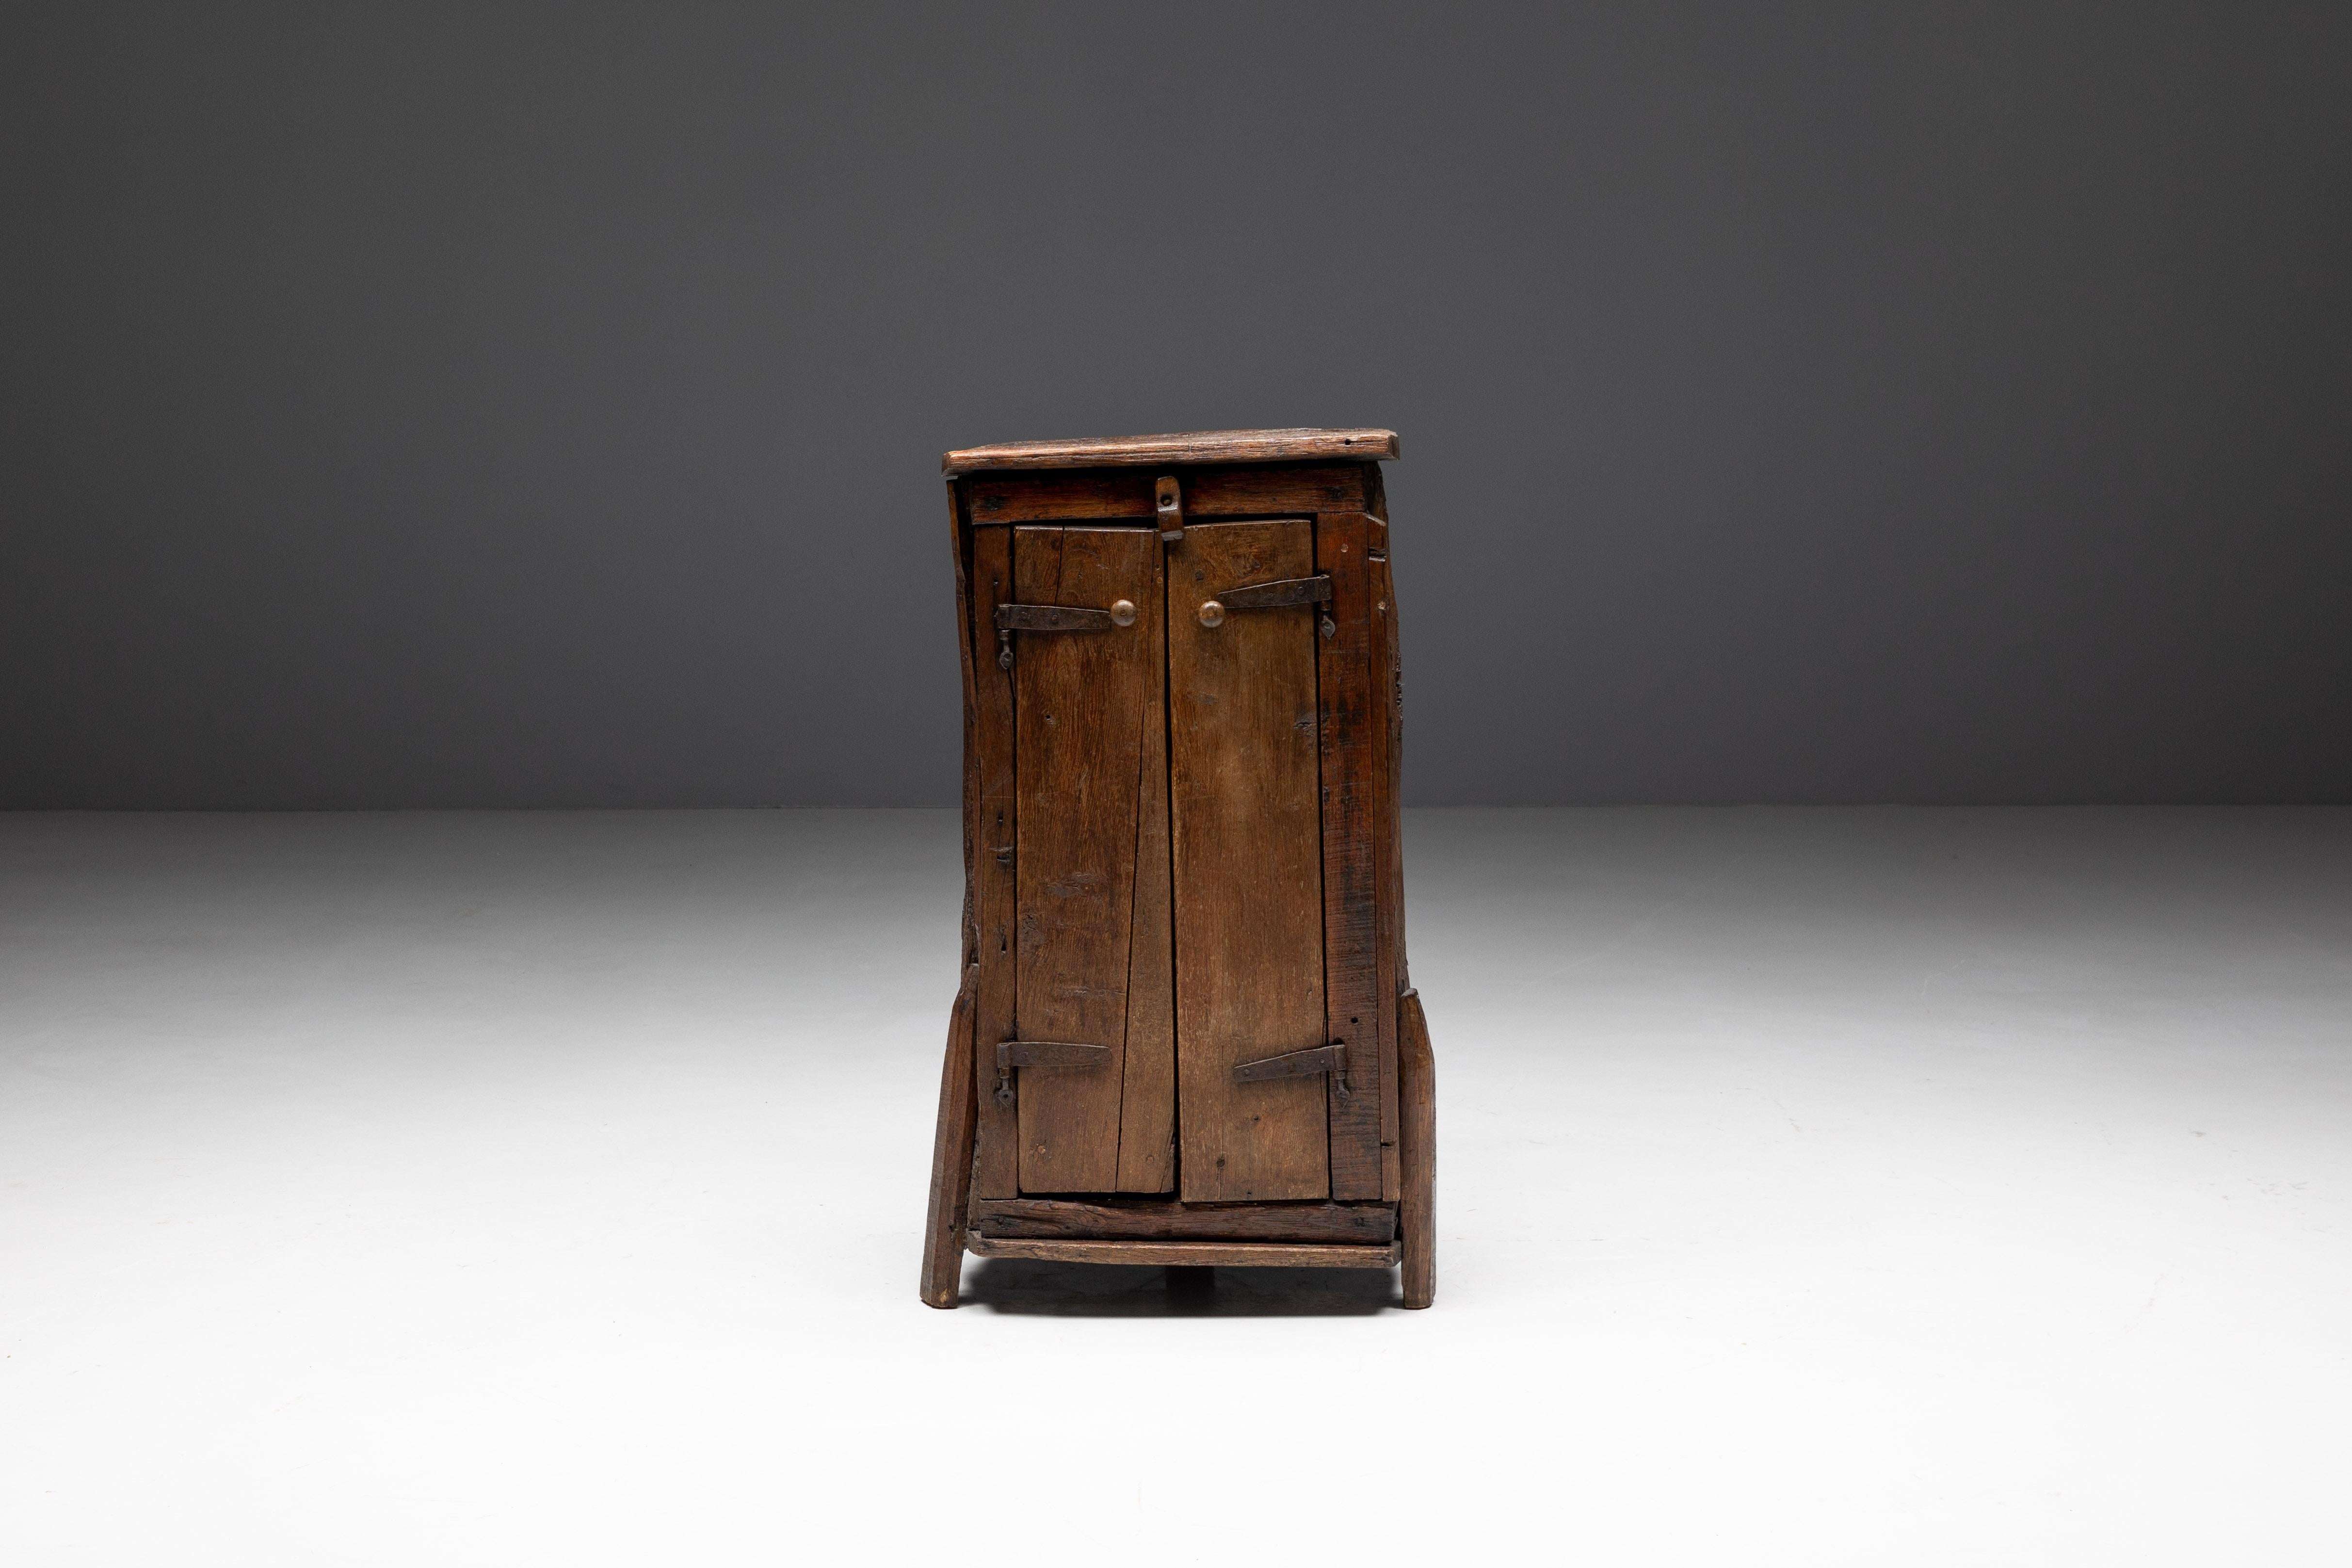 The rustic monoxylite cabinet from 19th century Denmark showcases the timeless craftsmanship of that era. Its solid wood construction and one-of-a-kind monoxylite back not only offer generous storage space and display options but also infuse a sense